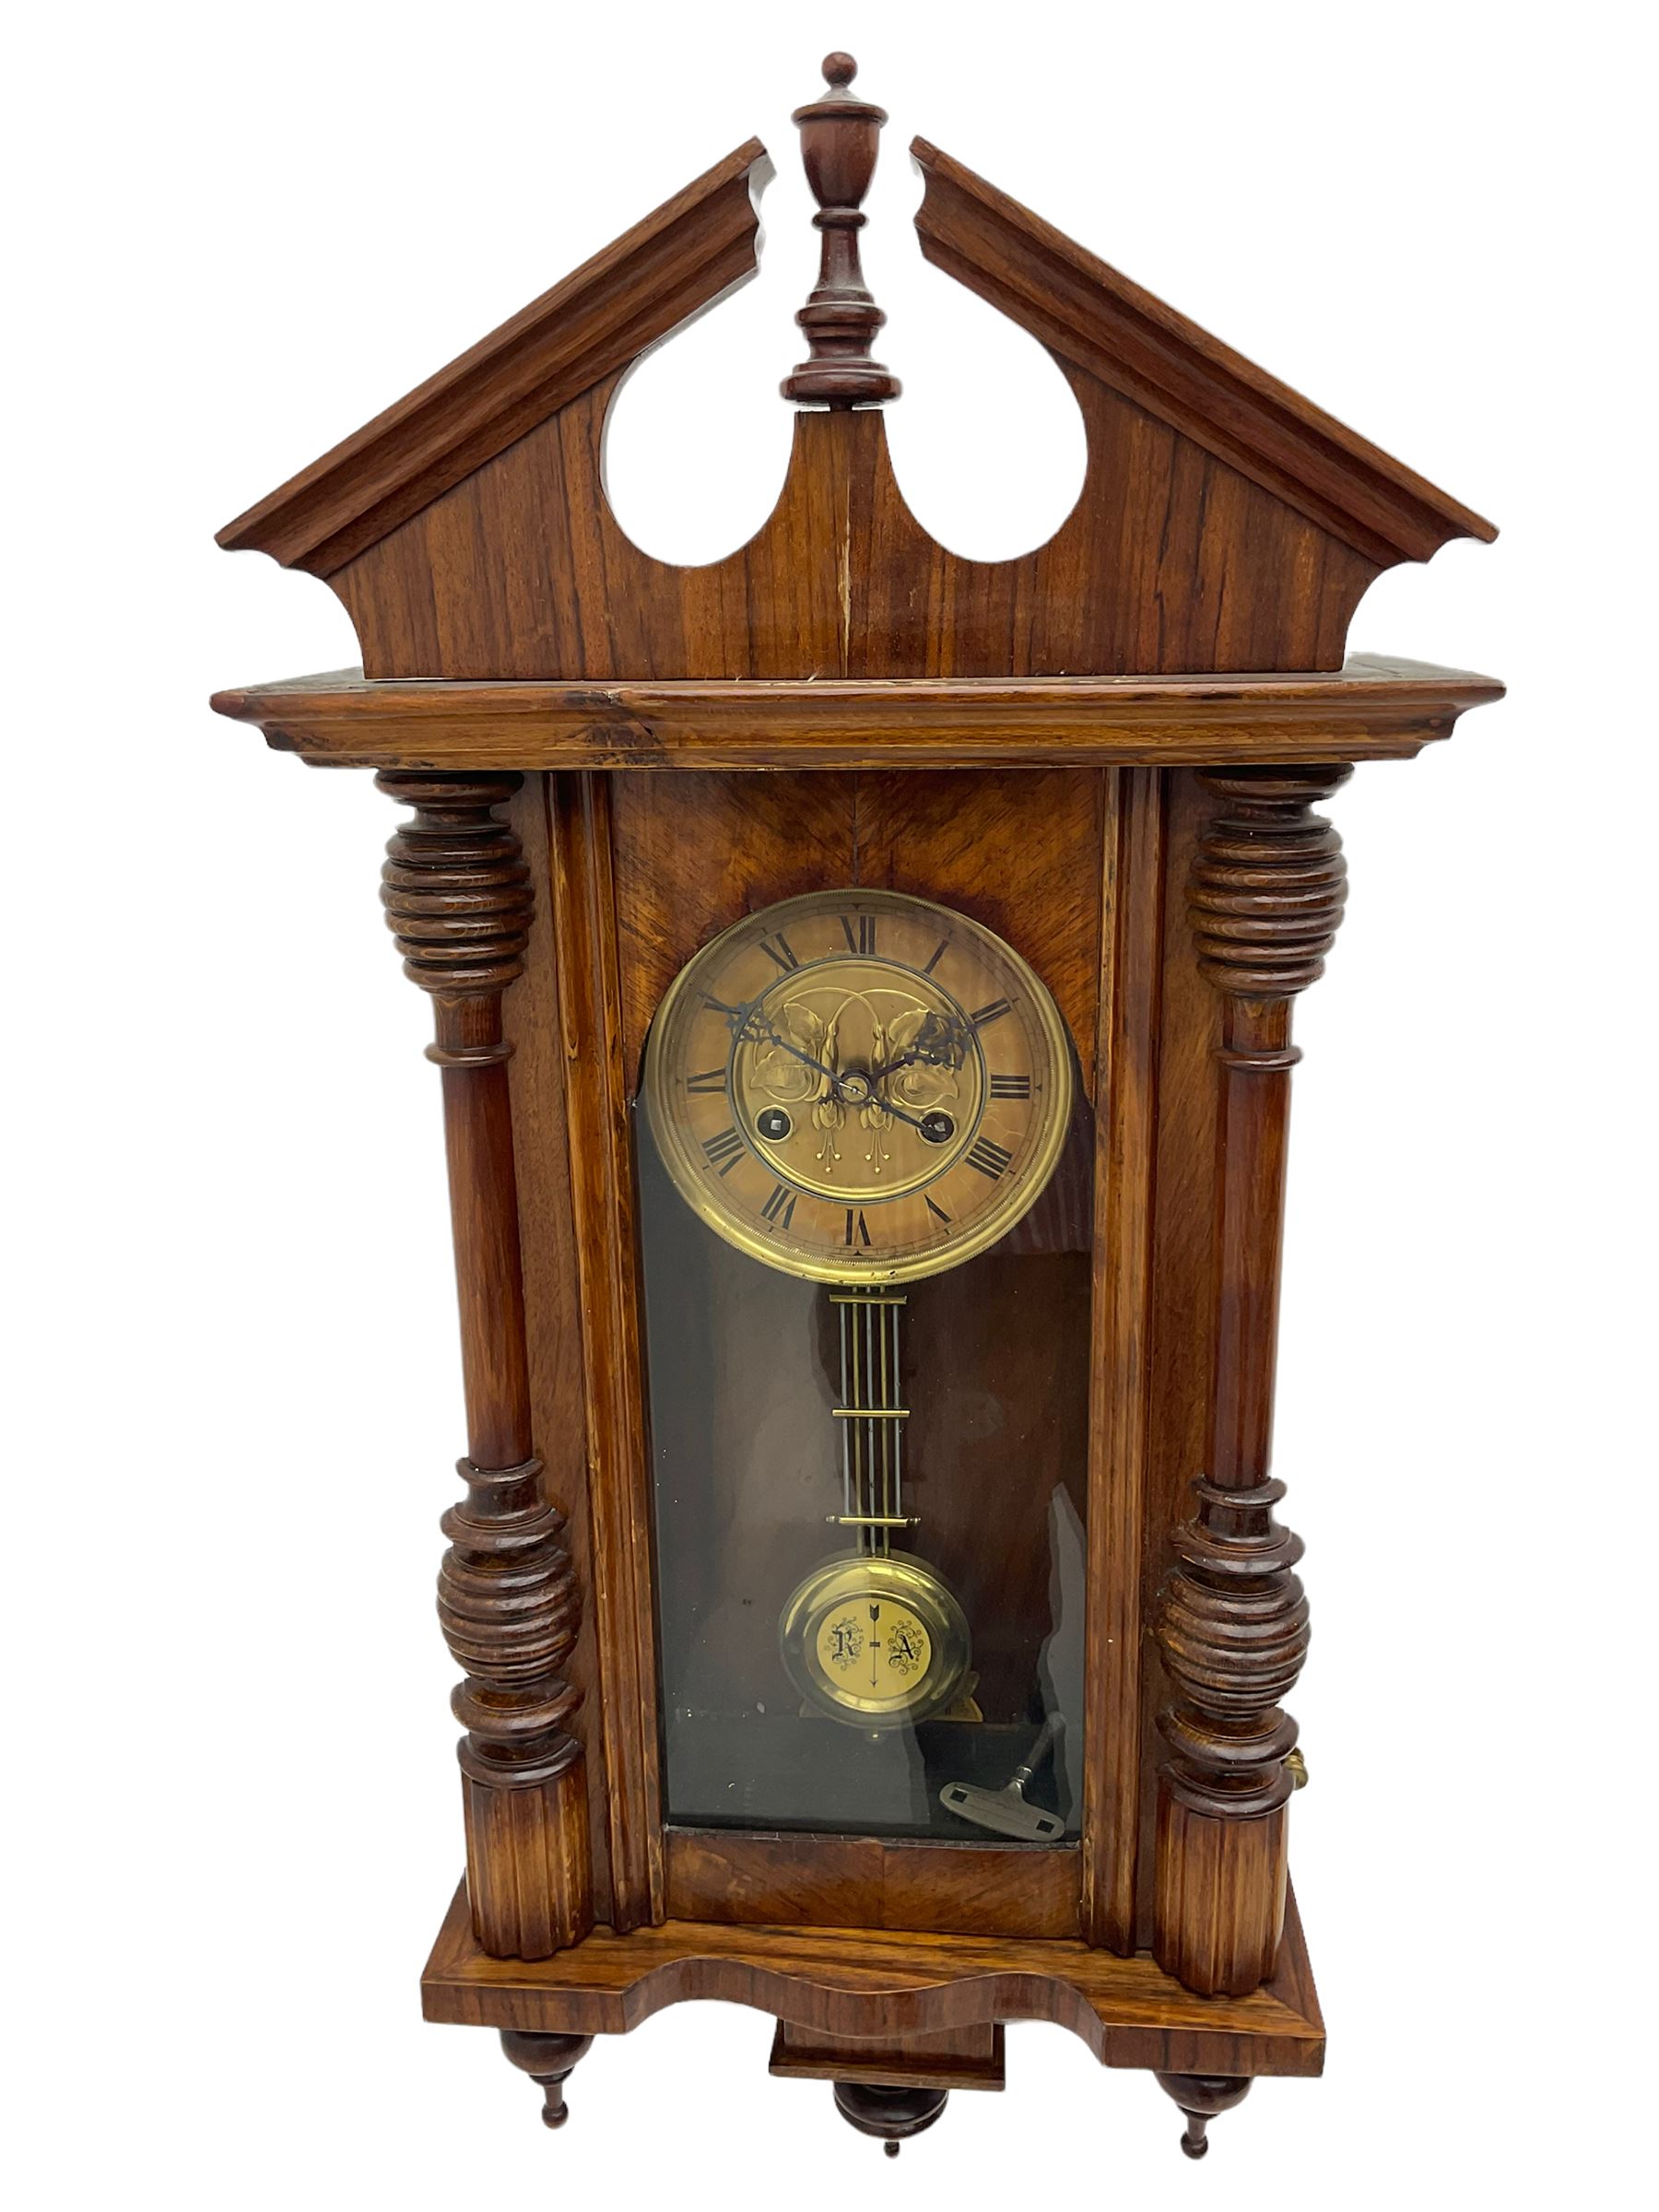 German early 20th century wall clock in a mahogany case with an architectural pediment and turned fi - Image 3 of 4